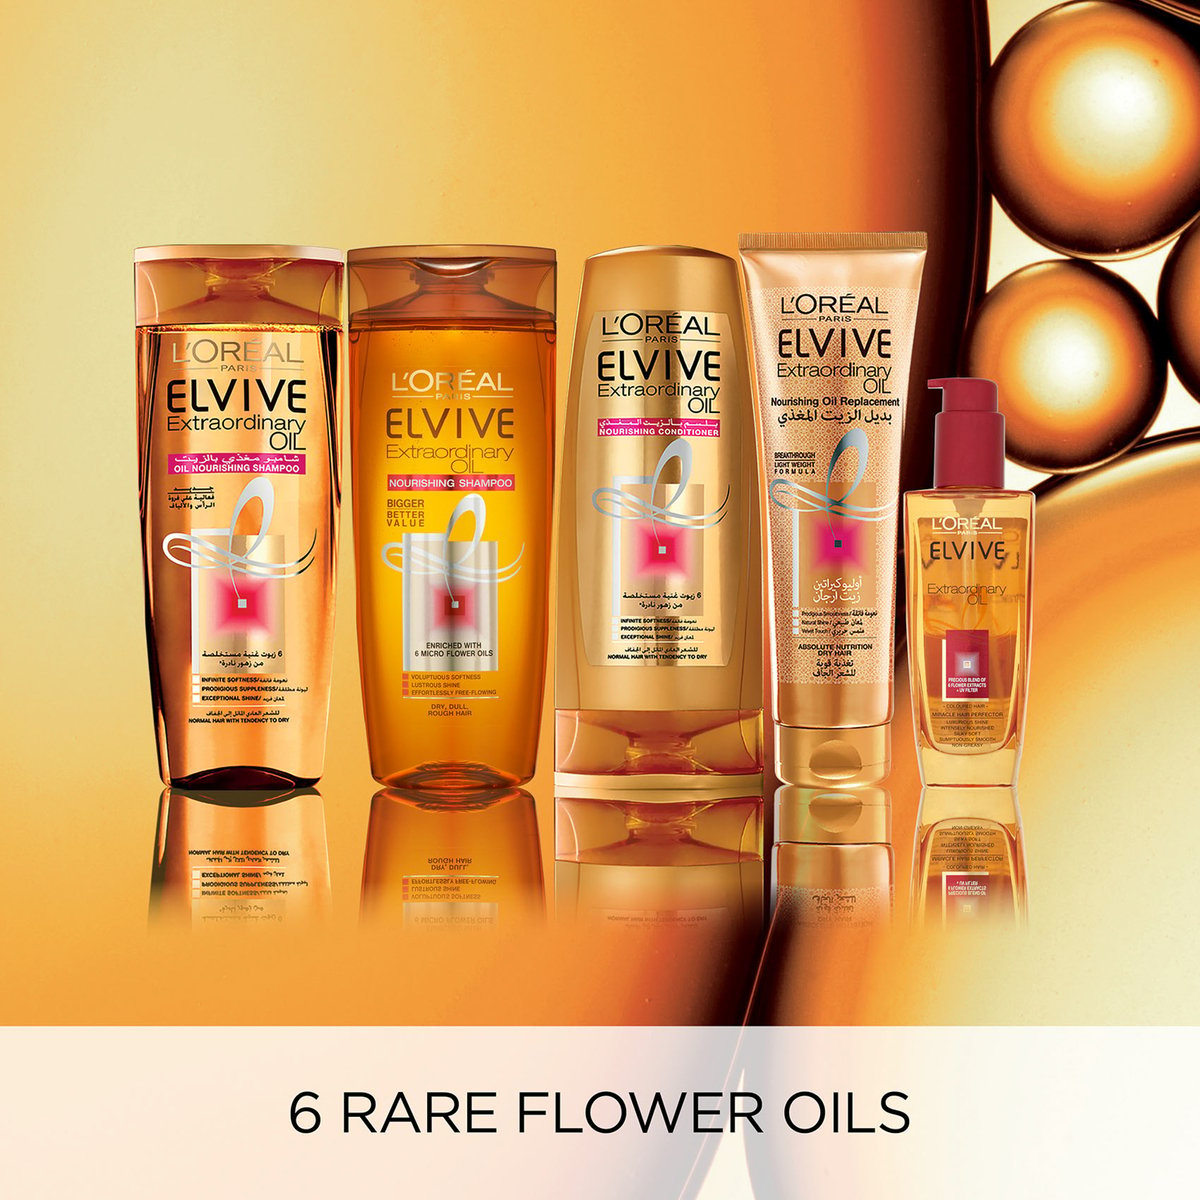 L'Oreal Elvive Extraordinary Nourishing Oil Replacement 300 ml